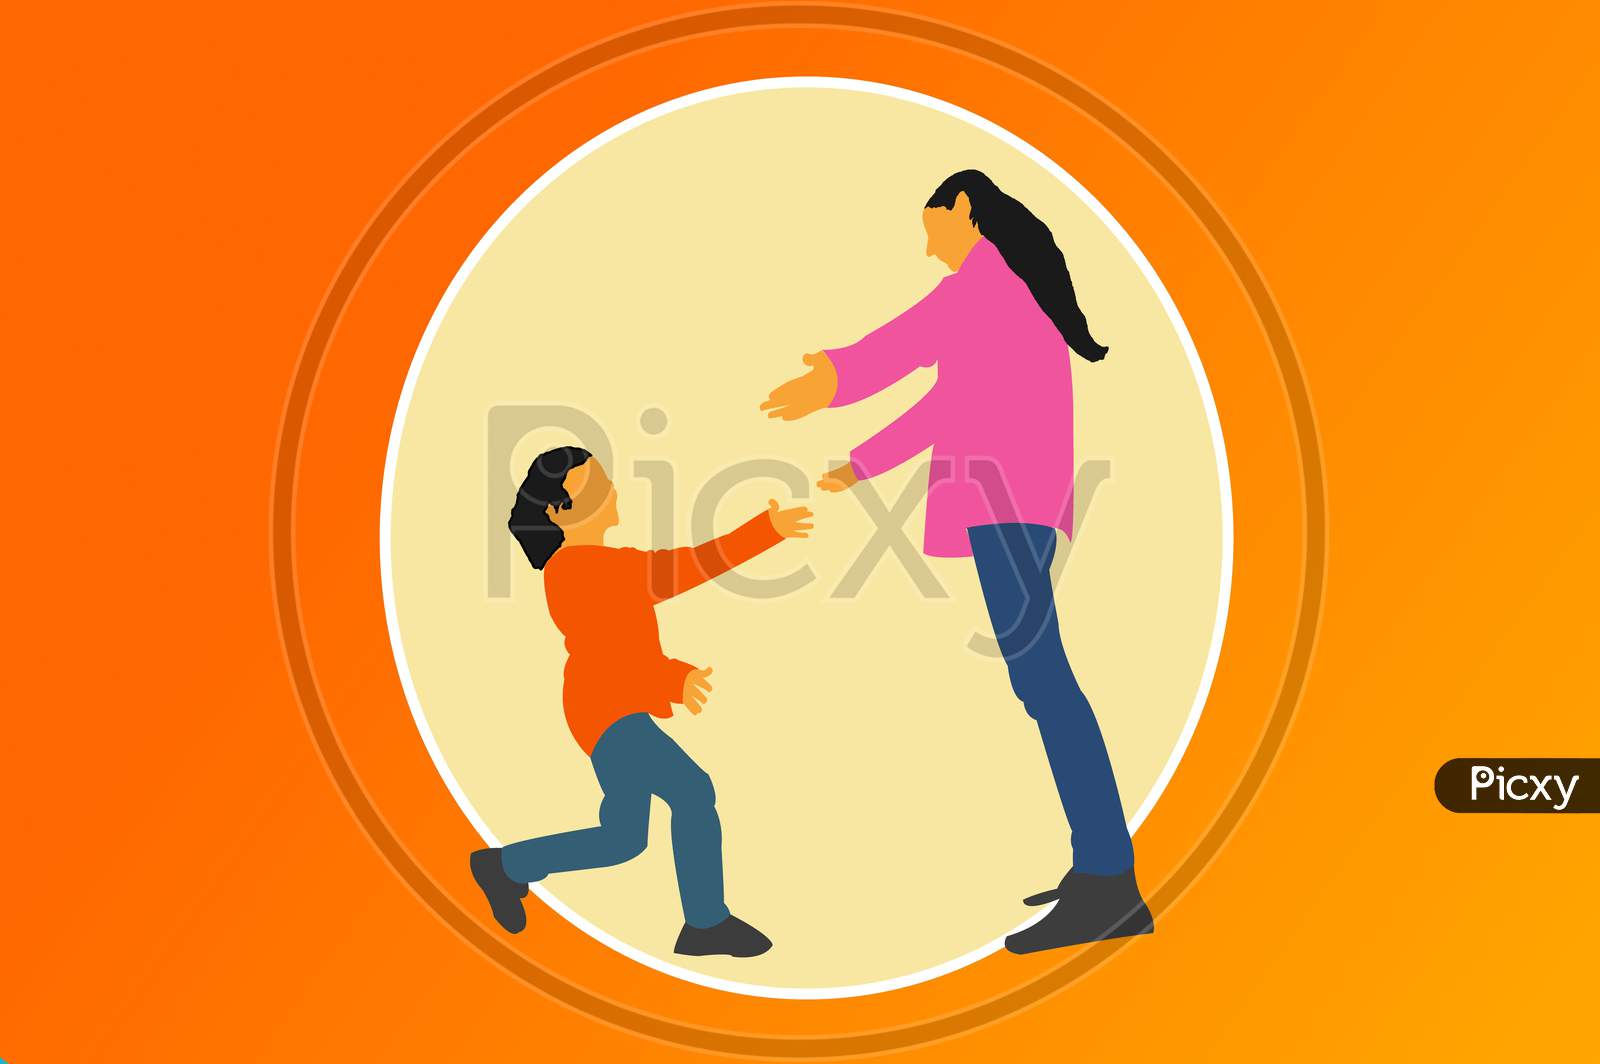 Illustration Graphic Of Child Running Toward His Mother For Getting A Hug From His Mom, For The Occasion Of Mother'S Day. Mother'S Day Concept Media, Isolated On Orange Background.